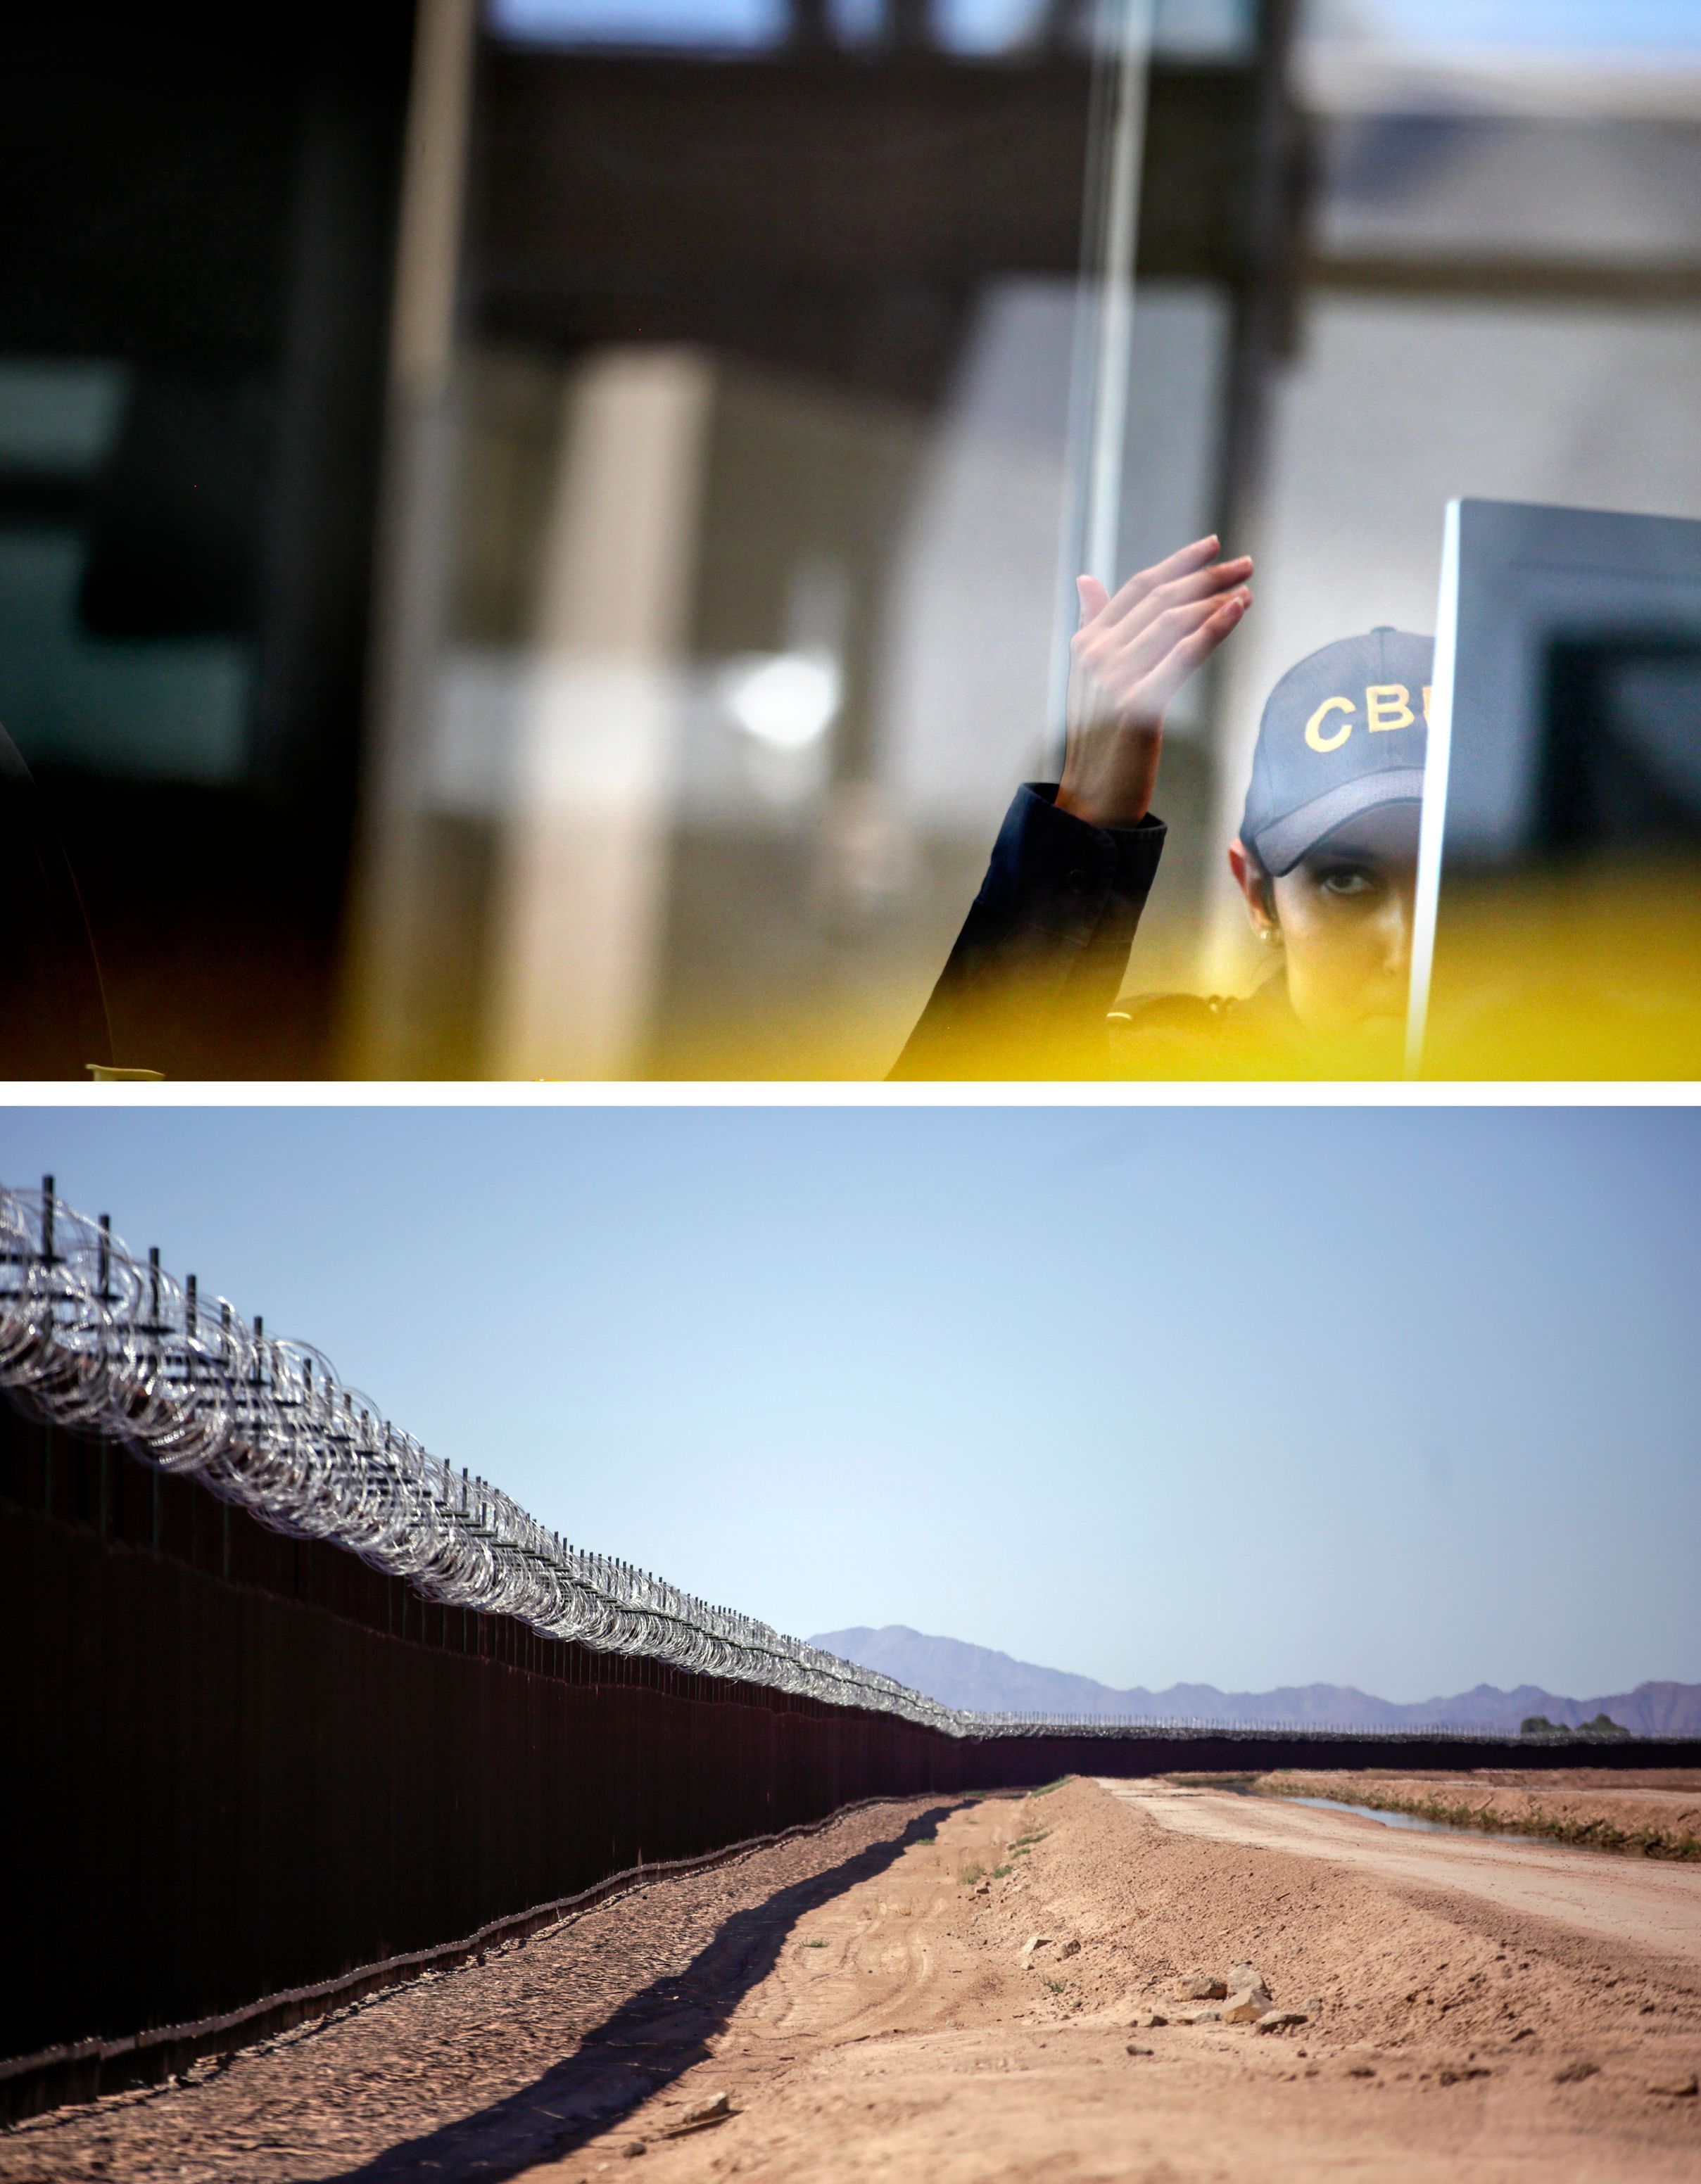 Top: A customs officer calls the next person to be screened at the San Luis border crossing. Bottom: The border wall near Yuma, Arizona. Image by Kathleen Flynn. United States, 2019.